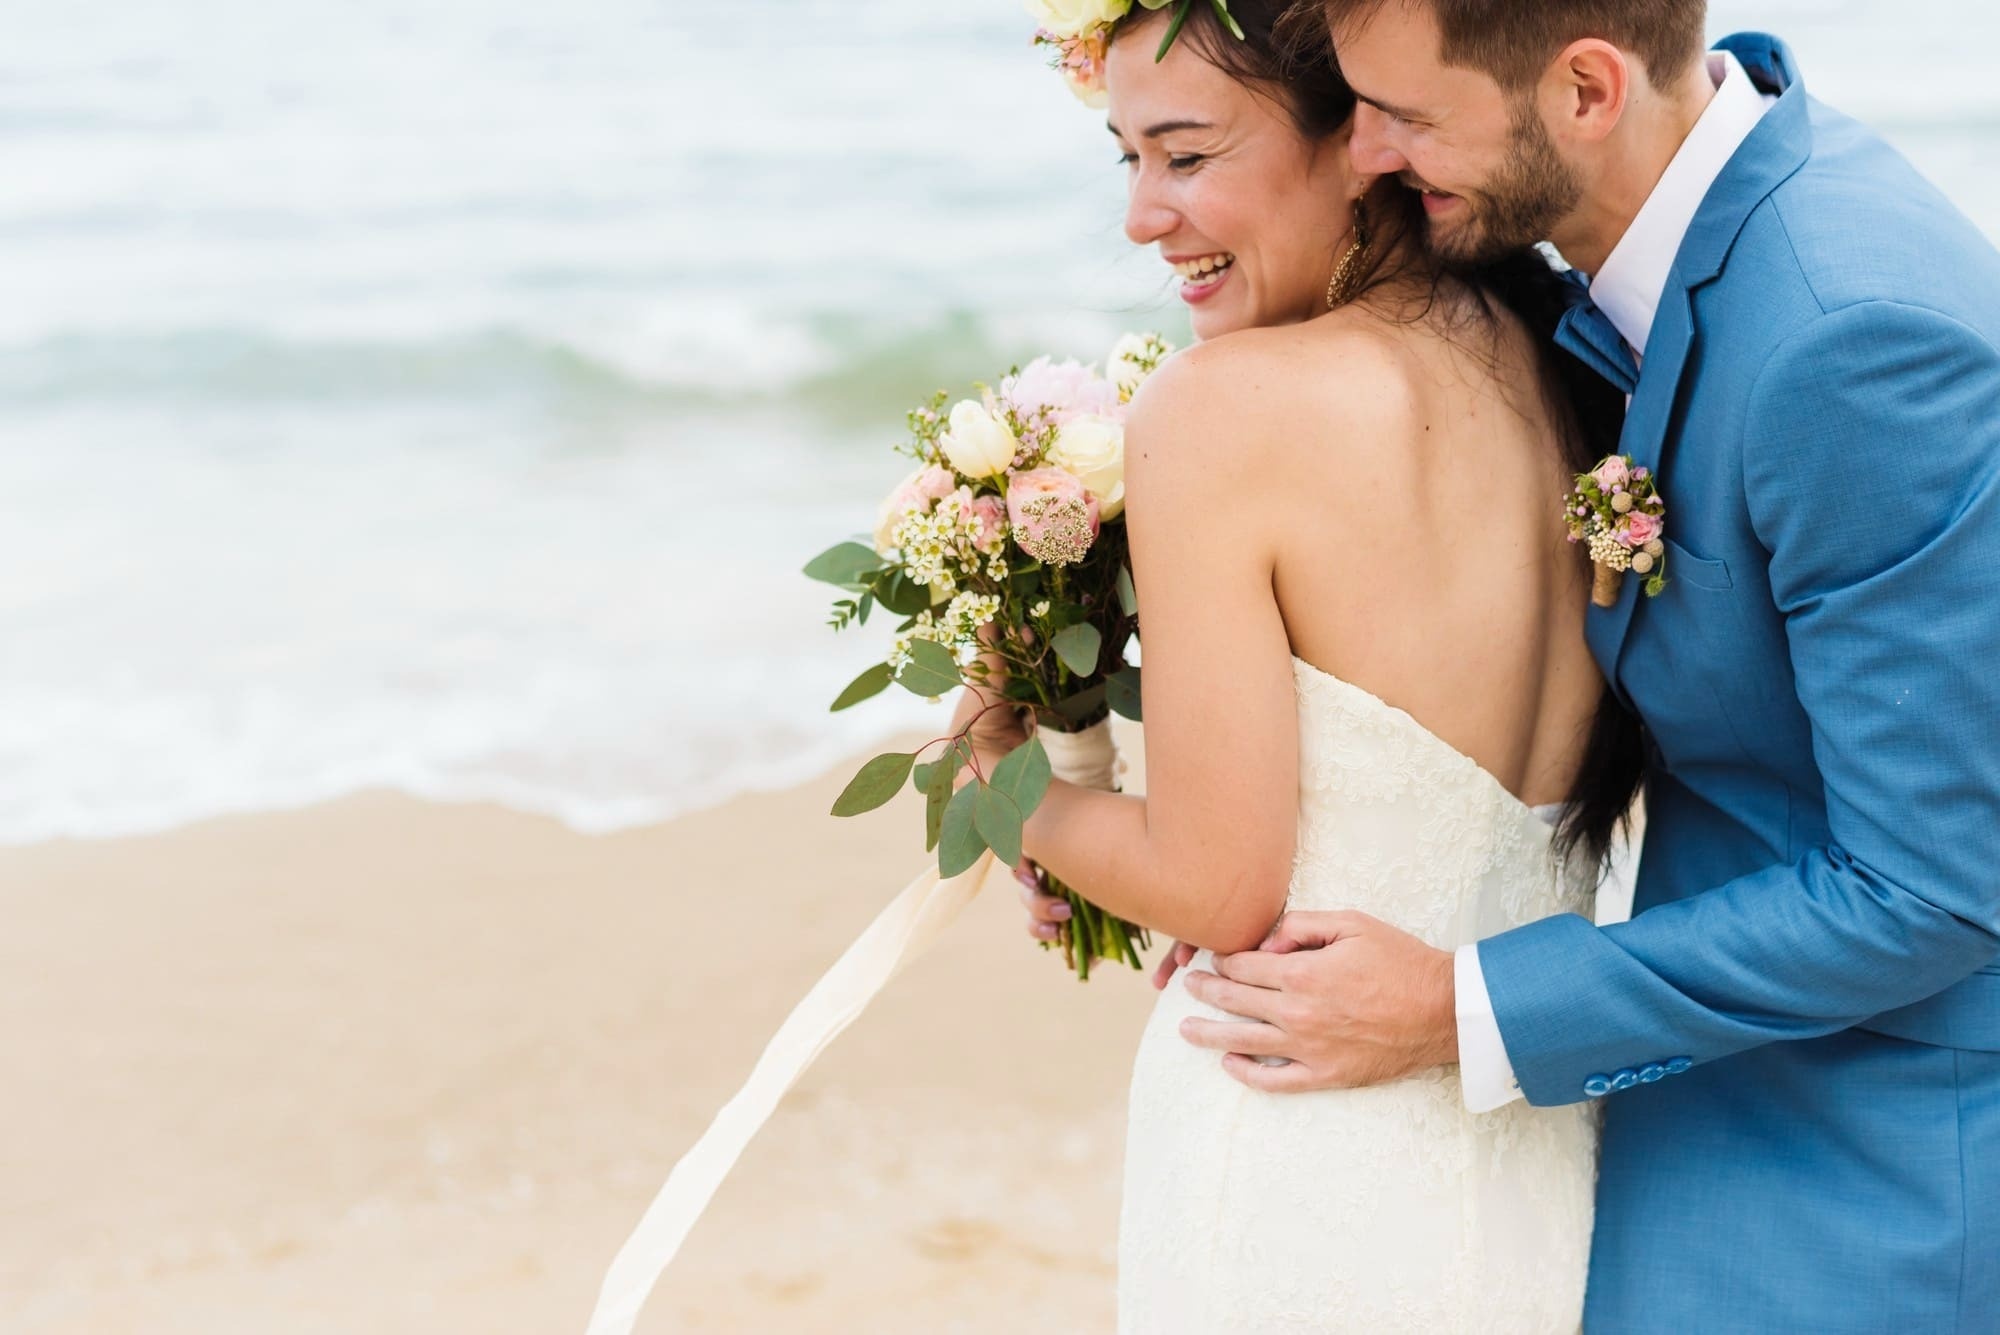 The best places for weddings in Mexico